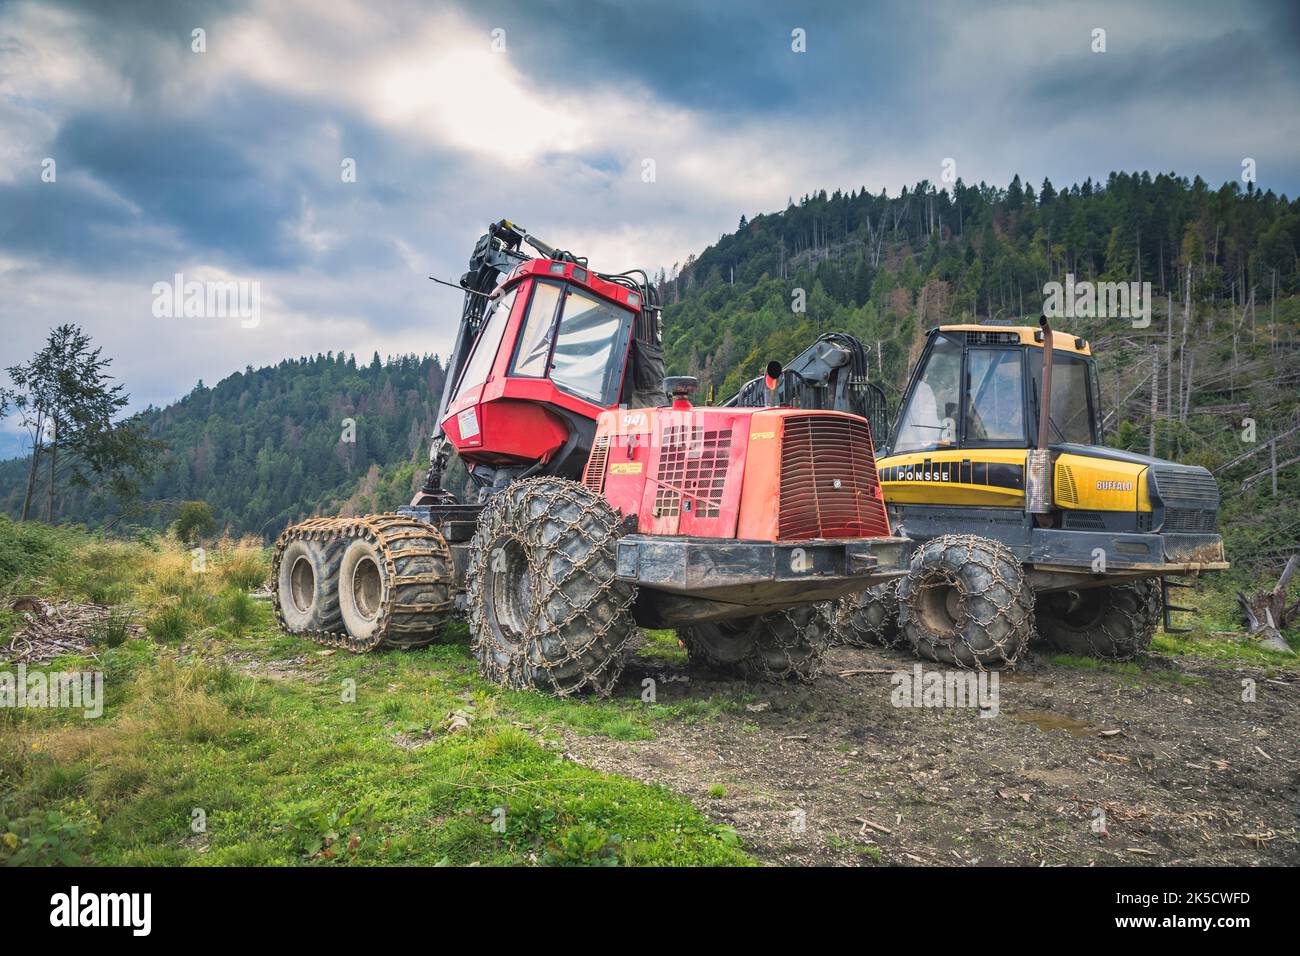 Italy, Veneto, provnce of Belluno, Dolomites. Harvester and Forwarder forestry vehicle in a forest hit by the storm Vaia Stock Photo